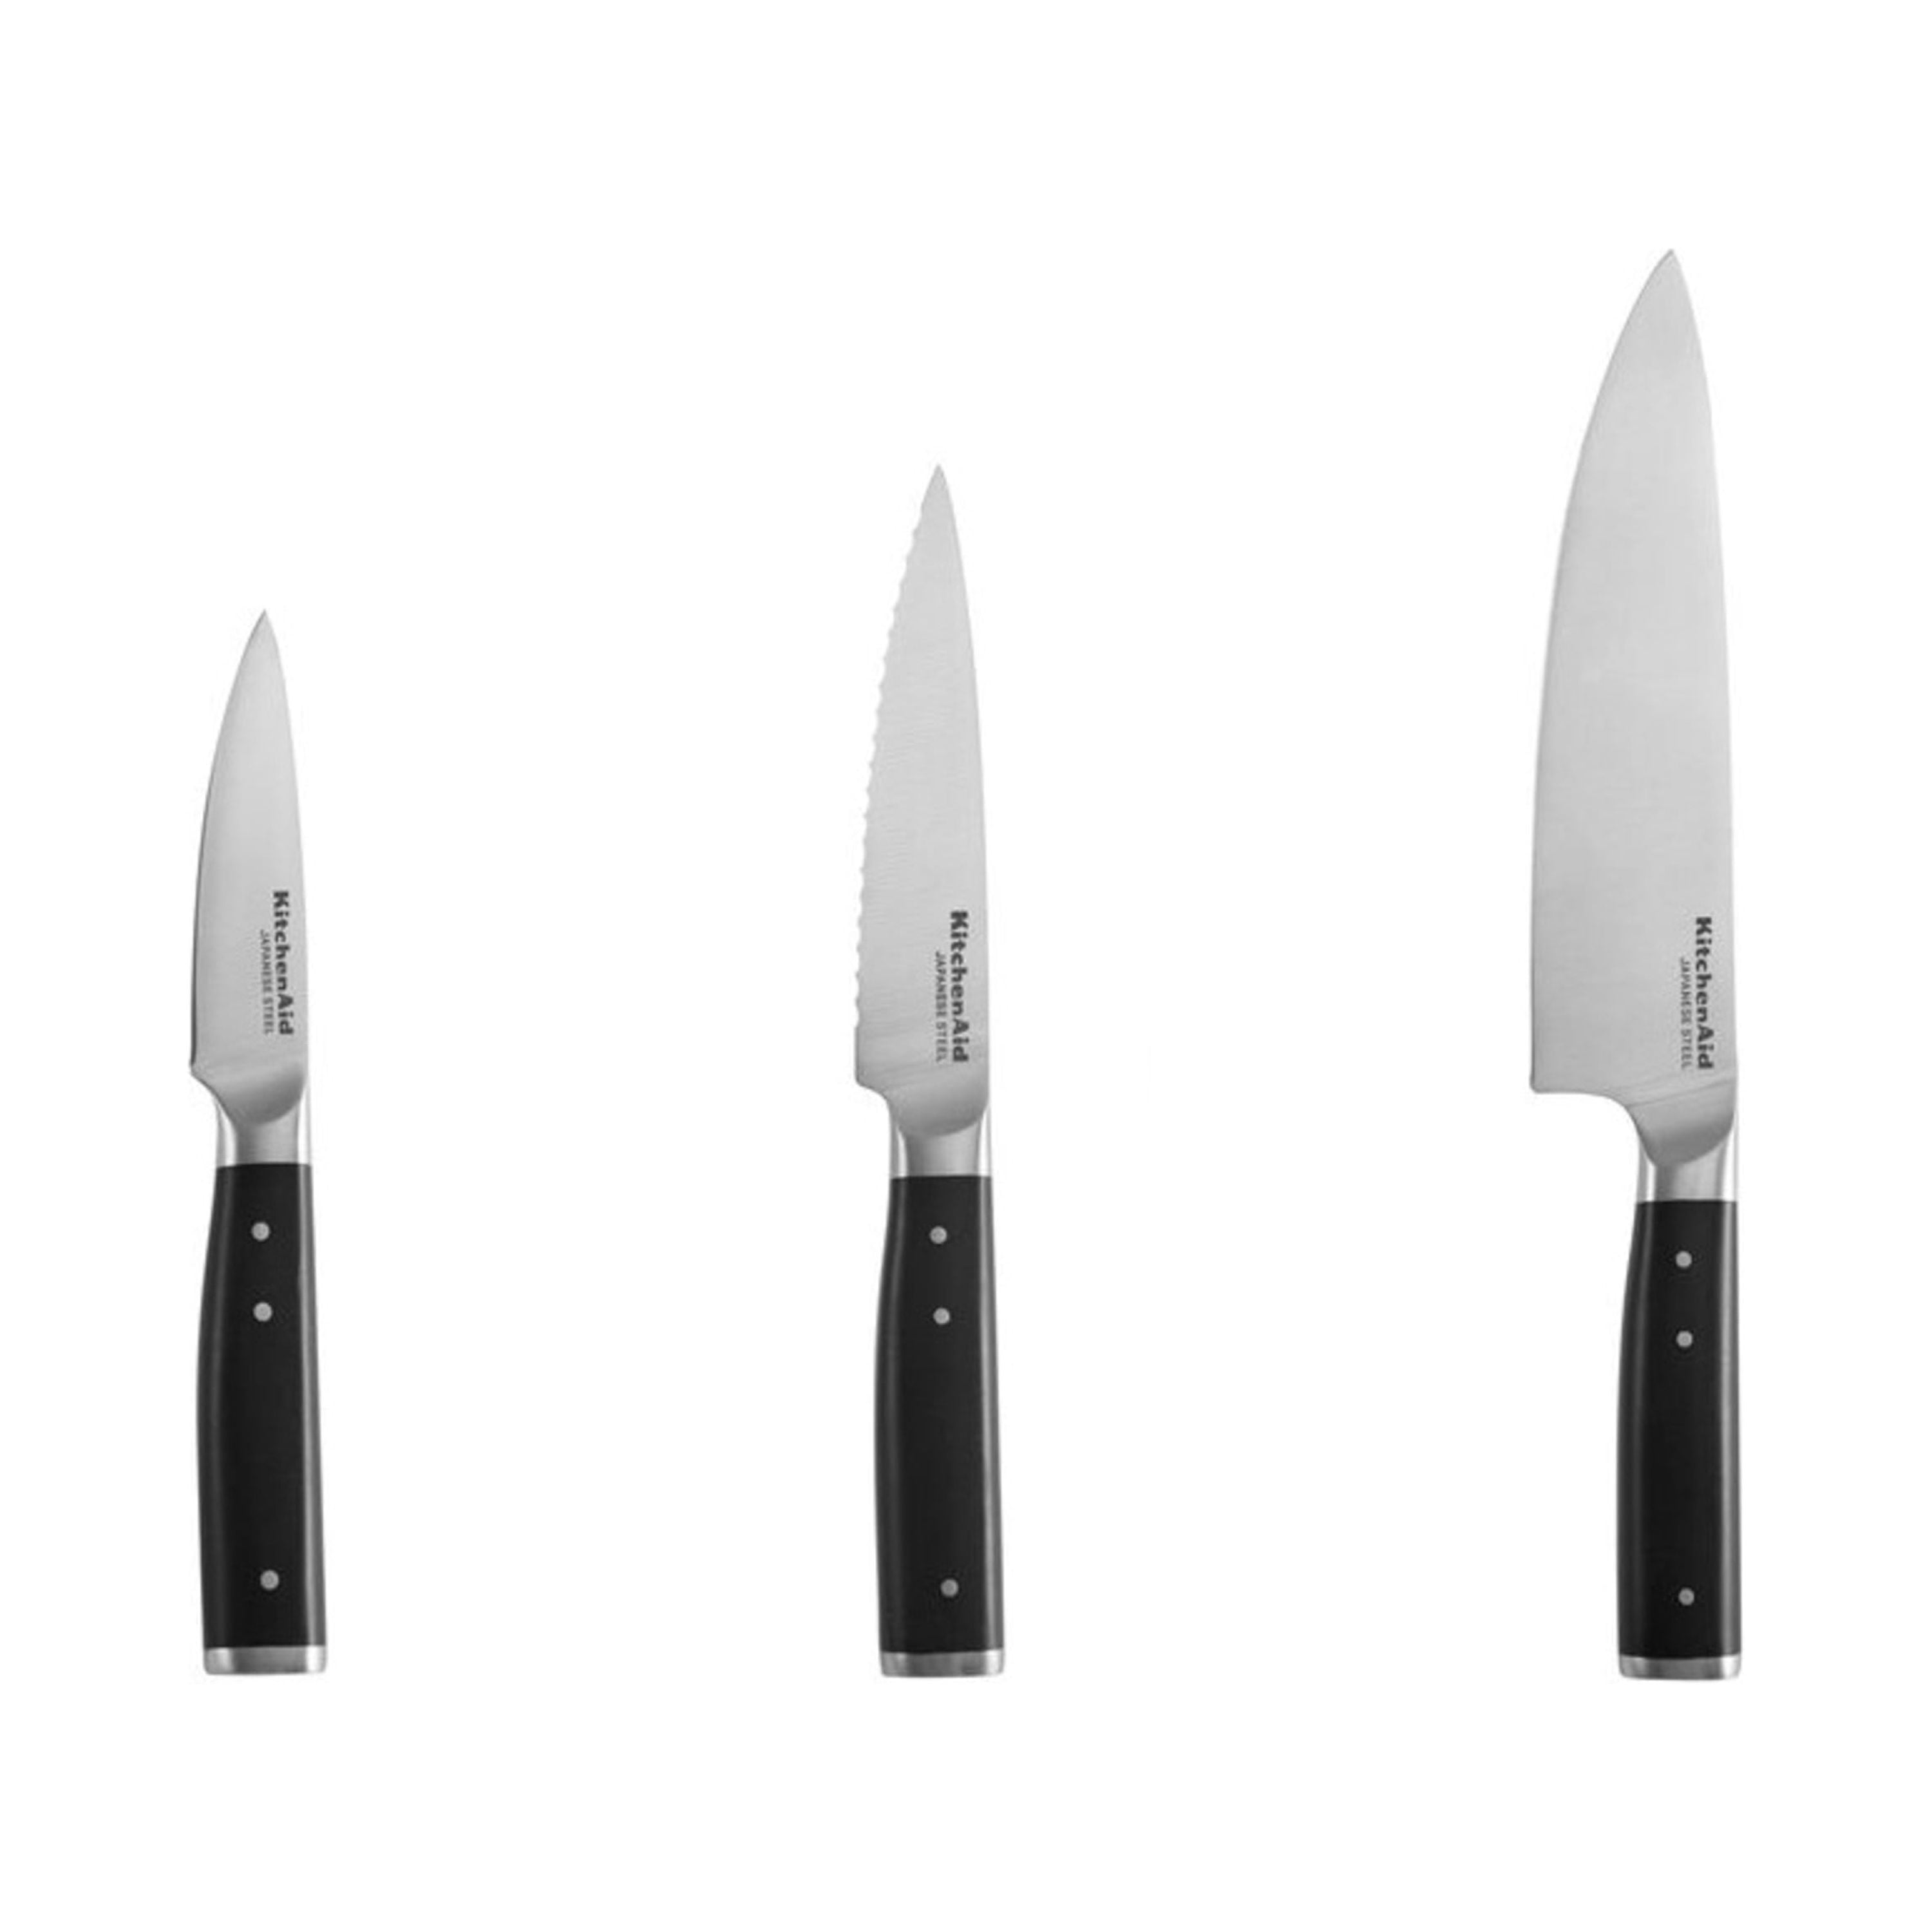 KitchenAid Gourmet Forged Triple Rivet Slicing Knife with Custom-Fit Blade  Cover, 8-inch, Black